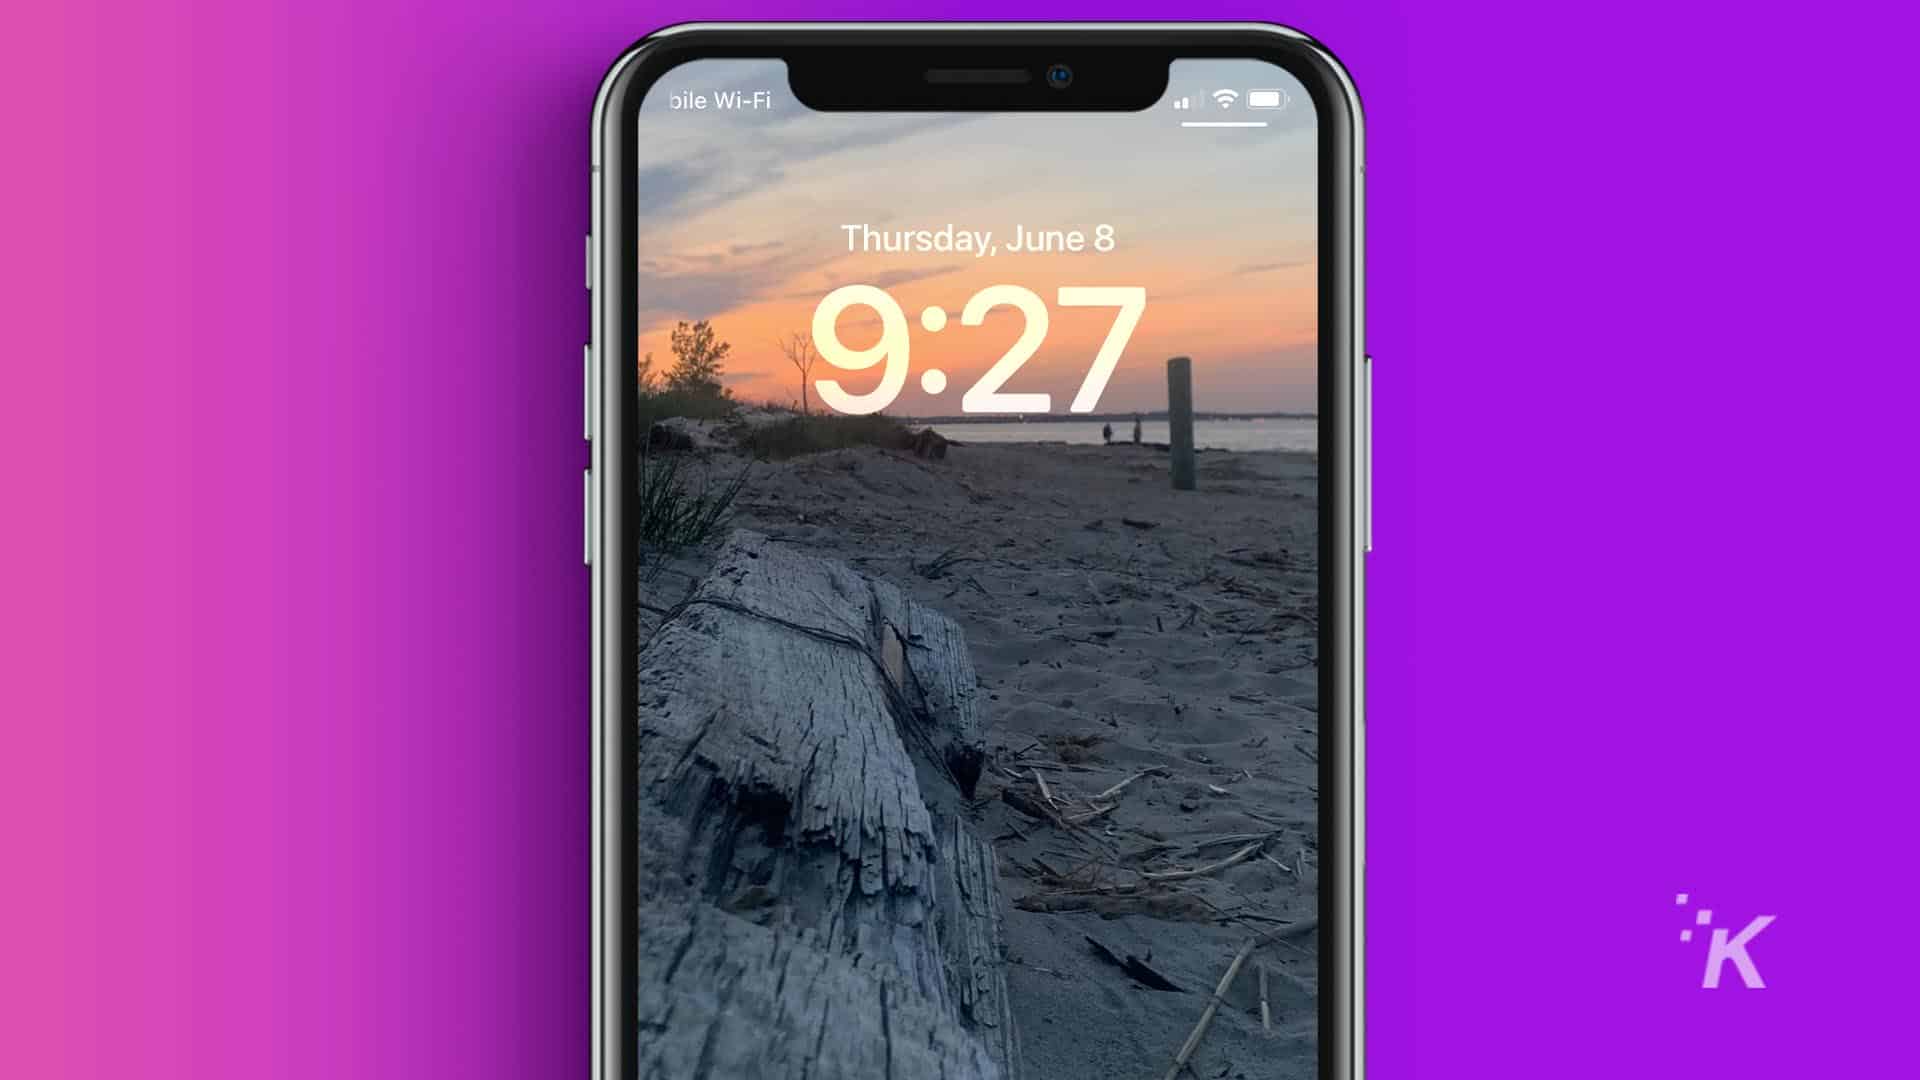 iPhone lock screen with picture of a sunset at the beach.